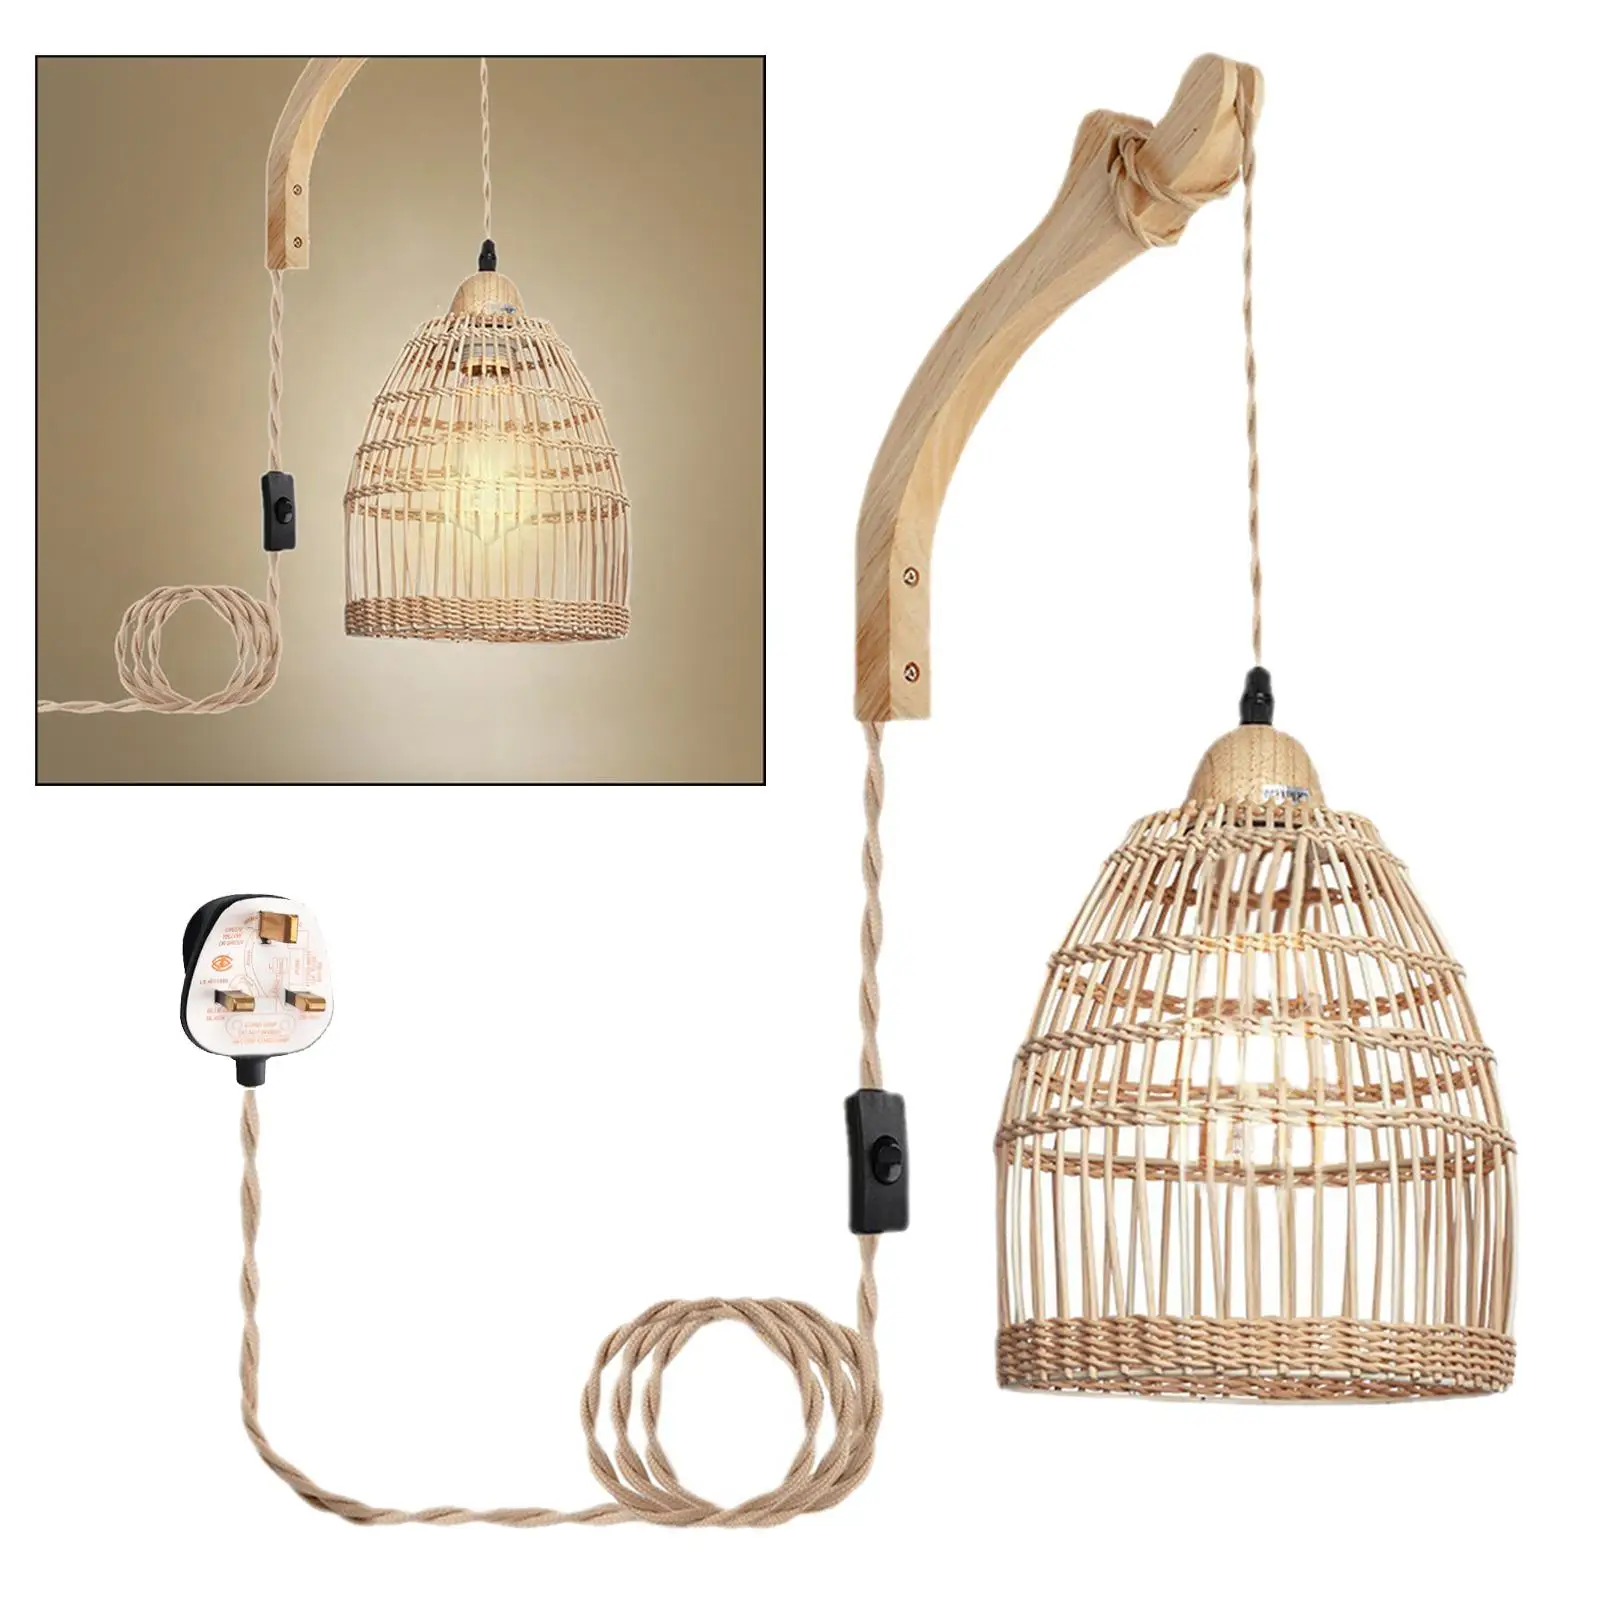 Wall Lamp Woven Bamboo Lantern Wall Sconce with Wood Bracket Farmhouse Wall Mounted Light for Nursery Home Hallway Bedside Porch